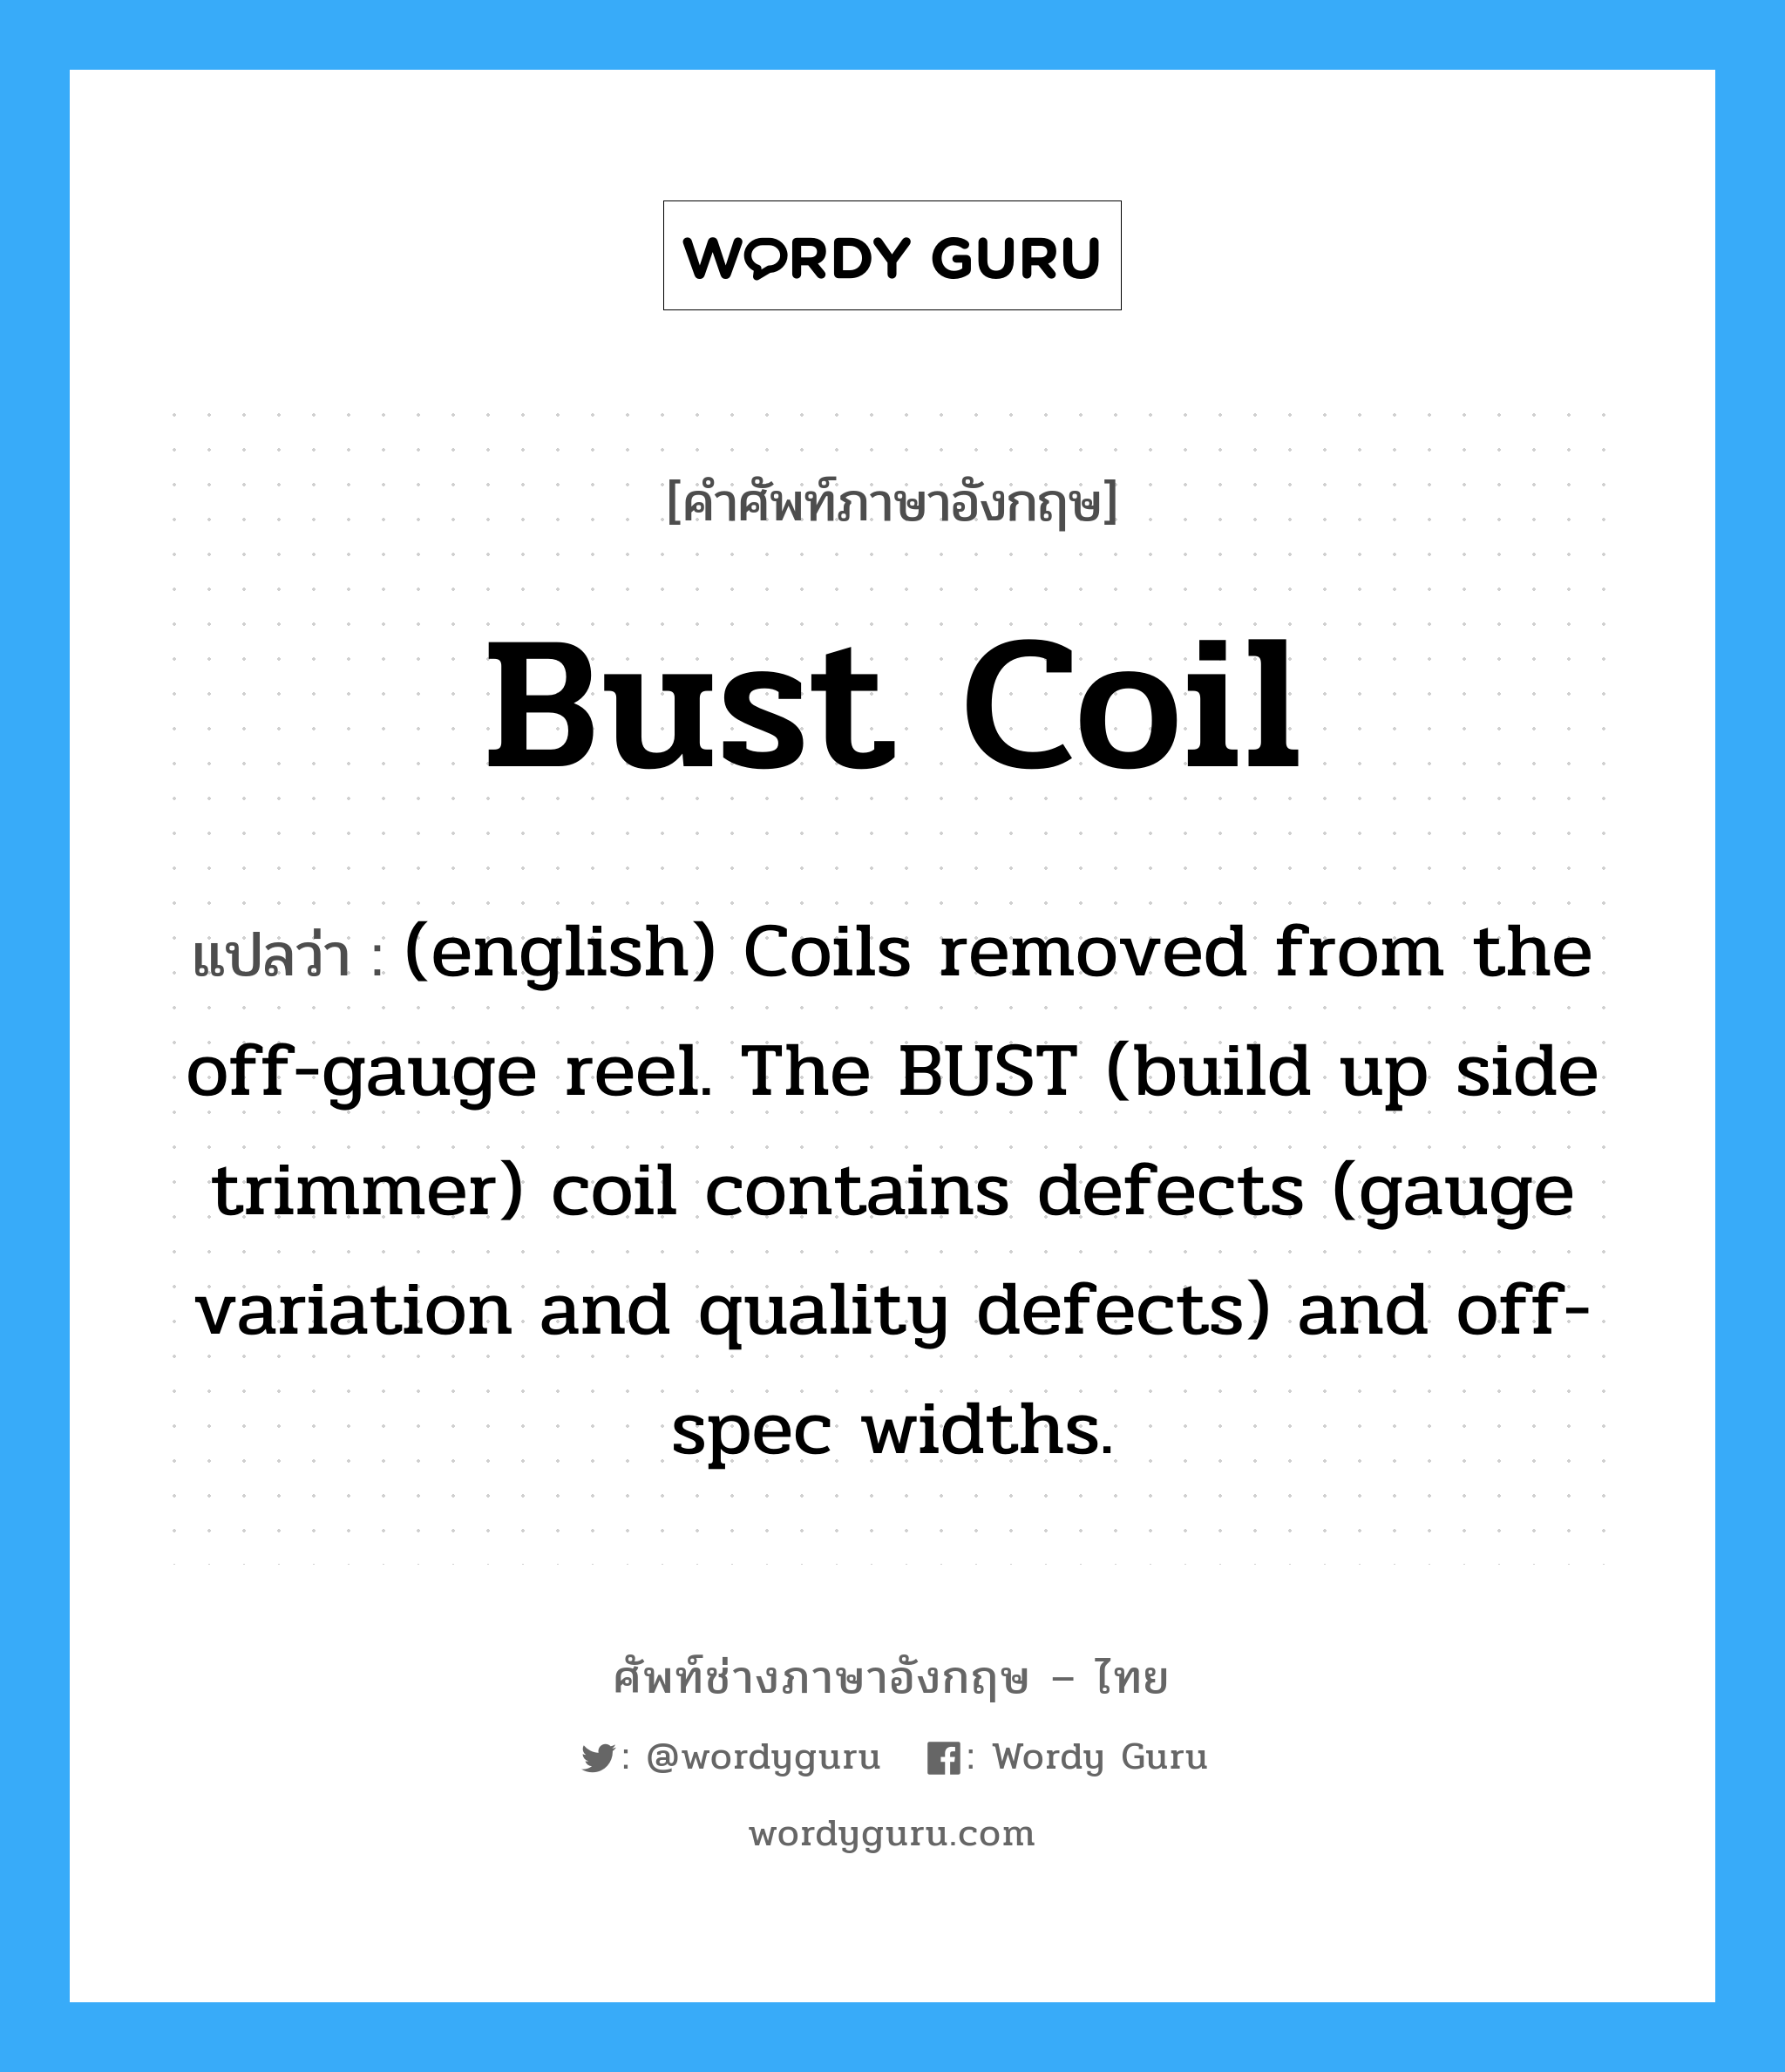 Bust Coil แปลว่า?, คำศัพท์ช่างภาษาอังกฤษ - ไทย Bust Coil คำศัพท์ภาษาอังกฤษ Bust Coil แปลว่า (english) Coils removed from the off-gauge reel. The BUST (build up side trimmer) coil contains defects (gauge variation and quality defects) and off-spec widths.